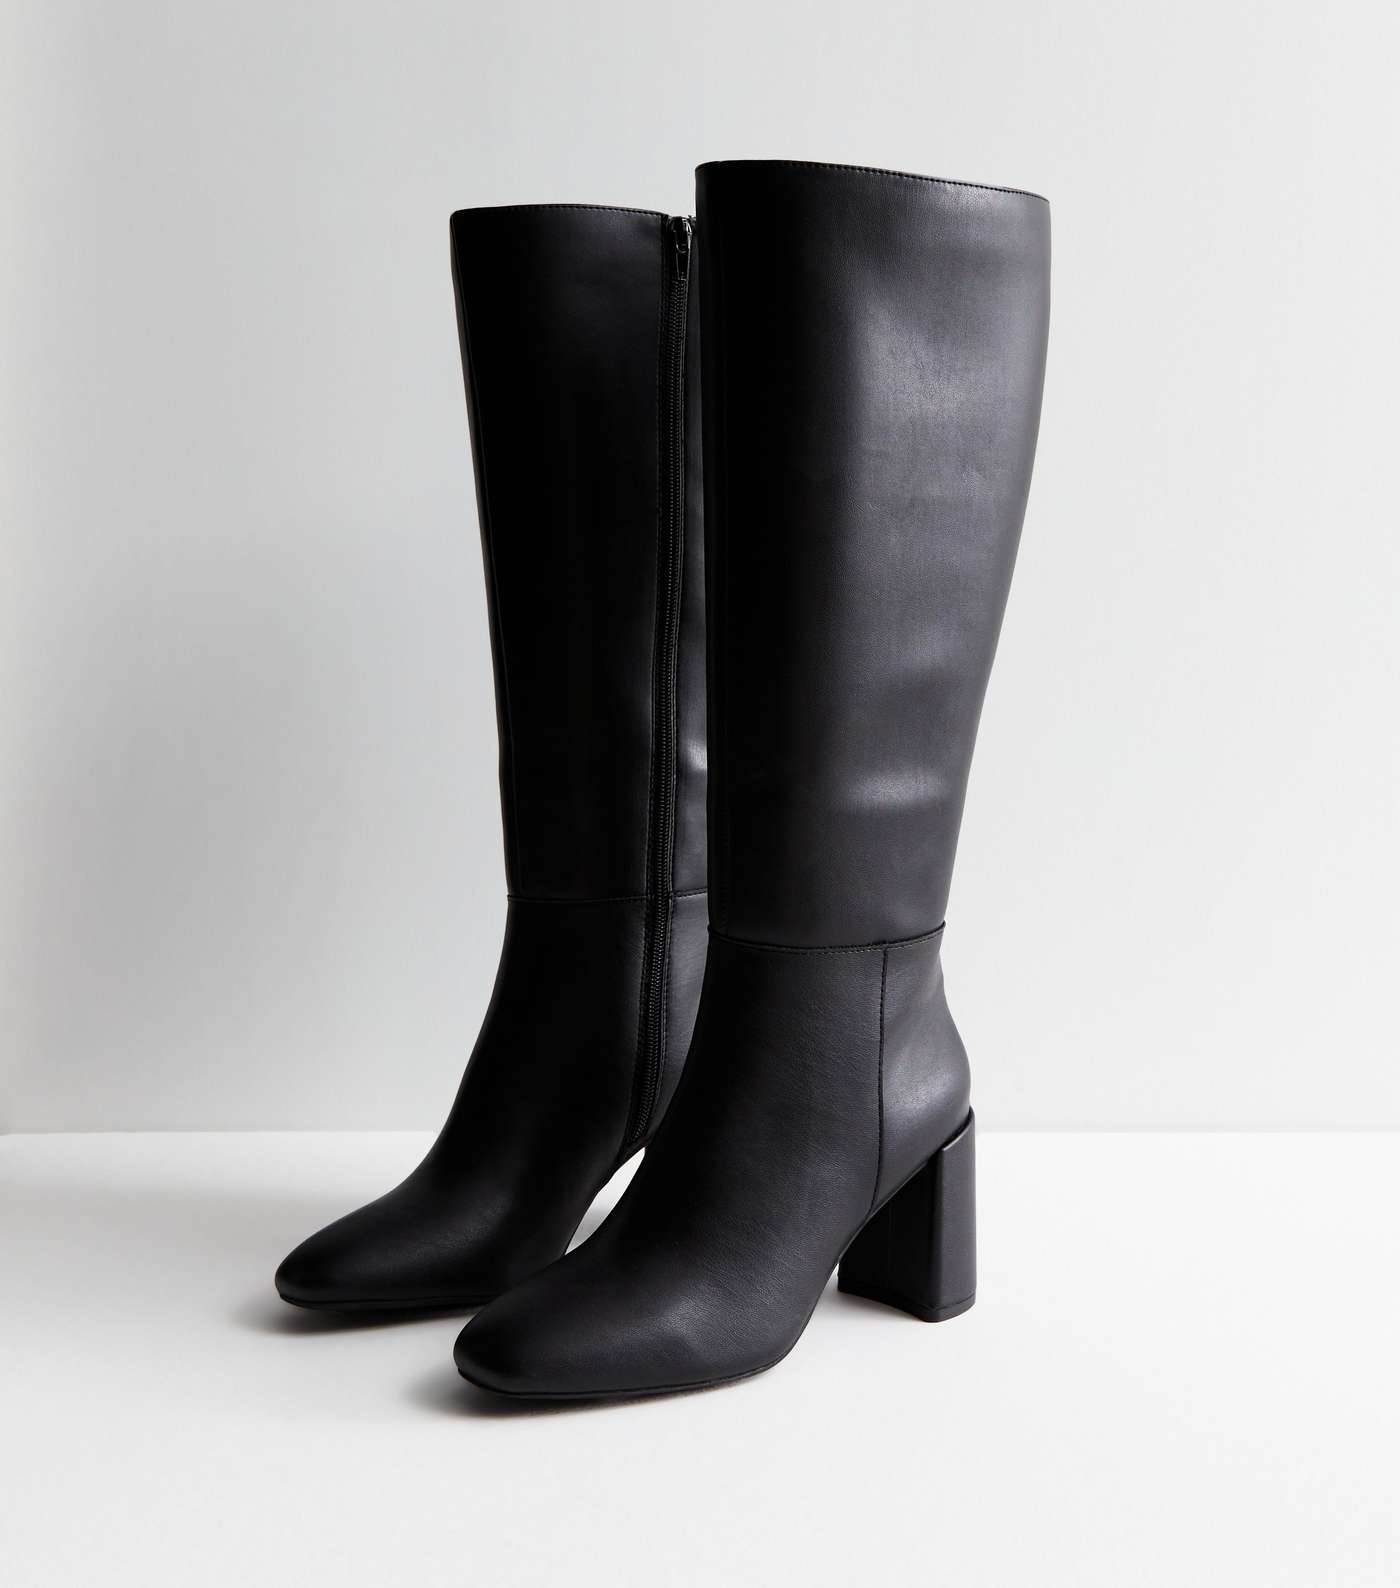 Extra Calf Fit Black Leather-Look Block Heel Knee High Boots Image 2